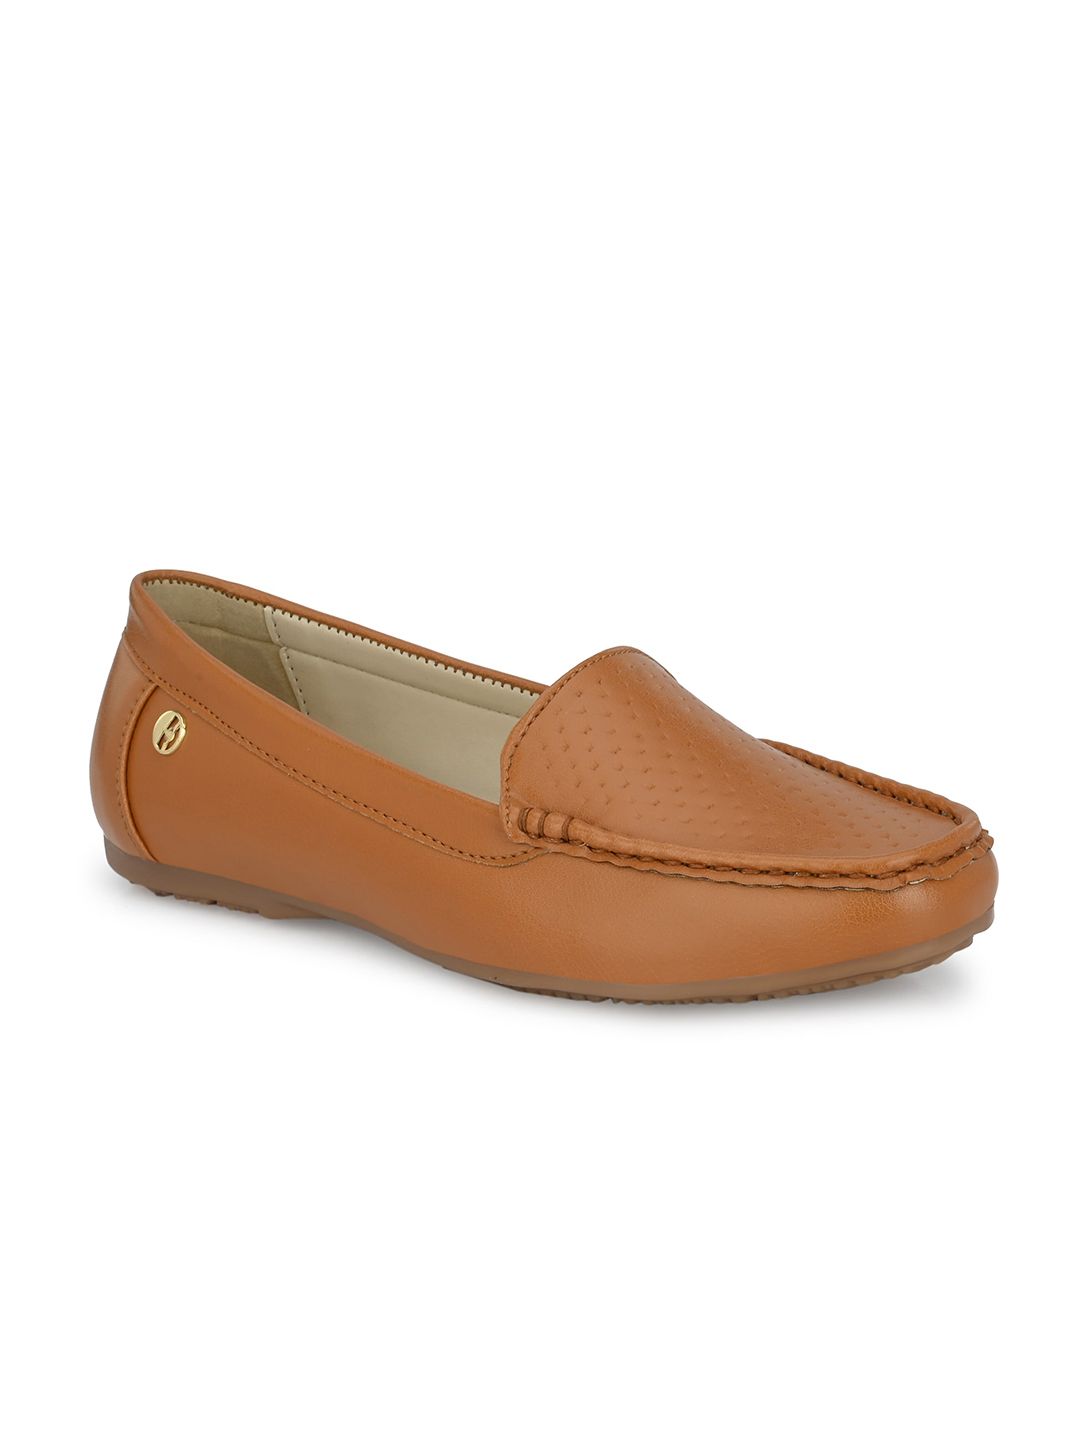 ELLE Women Perforations Loafers Price in India